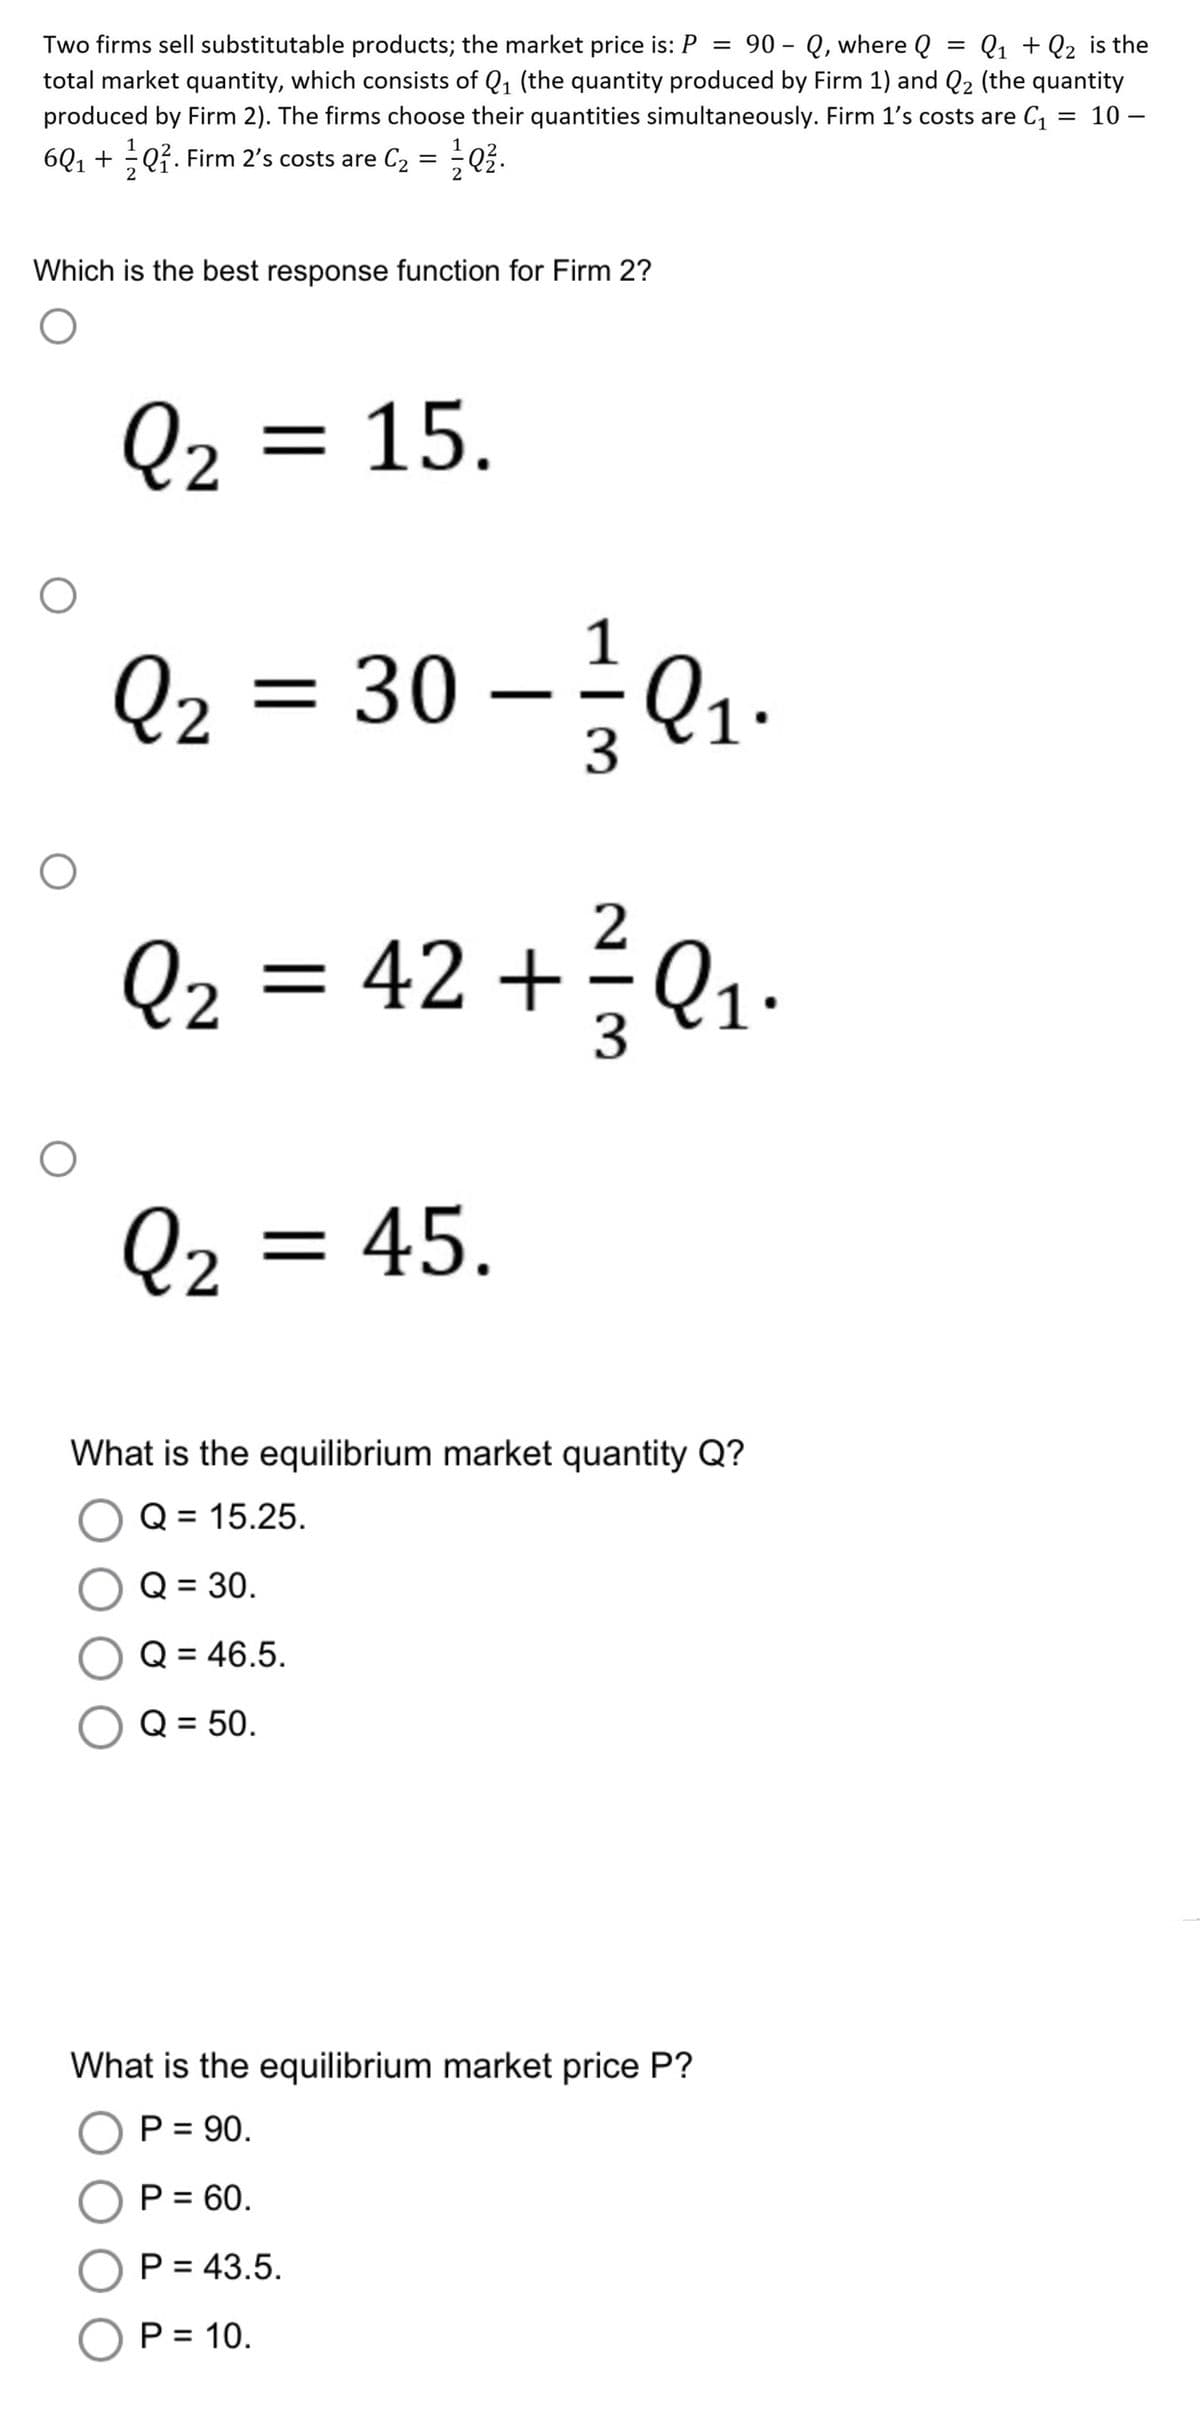 =
Two firms sell substitutable products; the market price is: P = 90-Q, where Q Q₁ + Q₂ is the
total market quantity, which consists of Q₁ (the quantity produced by Firm 1) and Q₂ (the quantity
produced by Firm 2). The firms choose their quantities simultaneously. Firm 1's costs are C₁ = 10-
6Q₁ +Q². Firm 2's costs are C₂ = Q².
Which is the best response function for Firm 2?
O
O
O
O
Q₂ = 15.
1
Q₂ = 30 - ²0₁₁
3
Q₂ = 42 + ²³² Q₁₁
2
=
1.
3
Q₂ = 45.
What is the equilibrium market quantity Q?
O Q = 15.25.
O Q = 30.
Q = 46.5.
O Q = 50.
What is the equilibrium market price P?
O P = 90.
O P = 60.
O P = 43.5.
O P = 10.